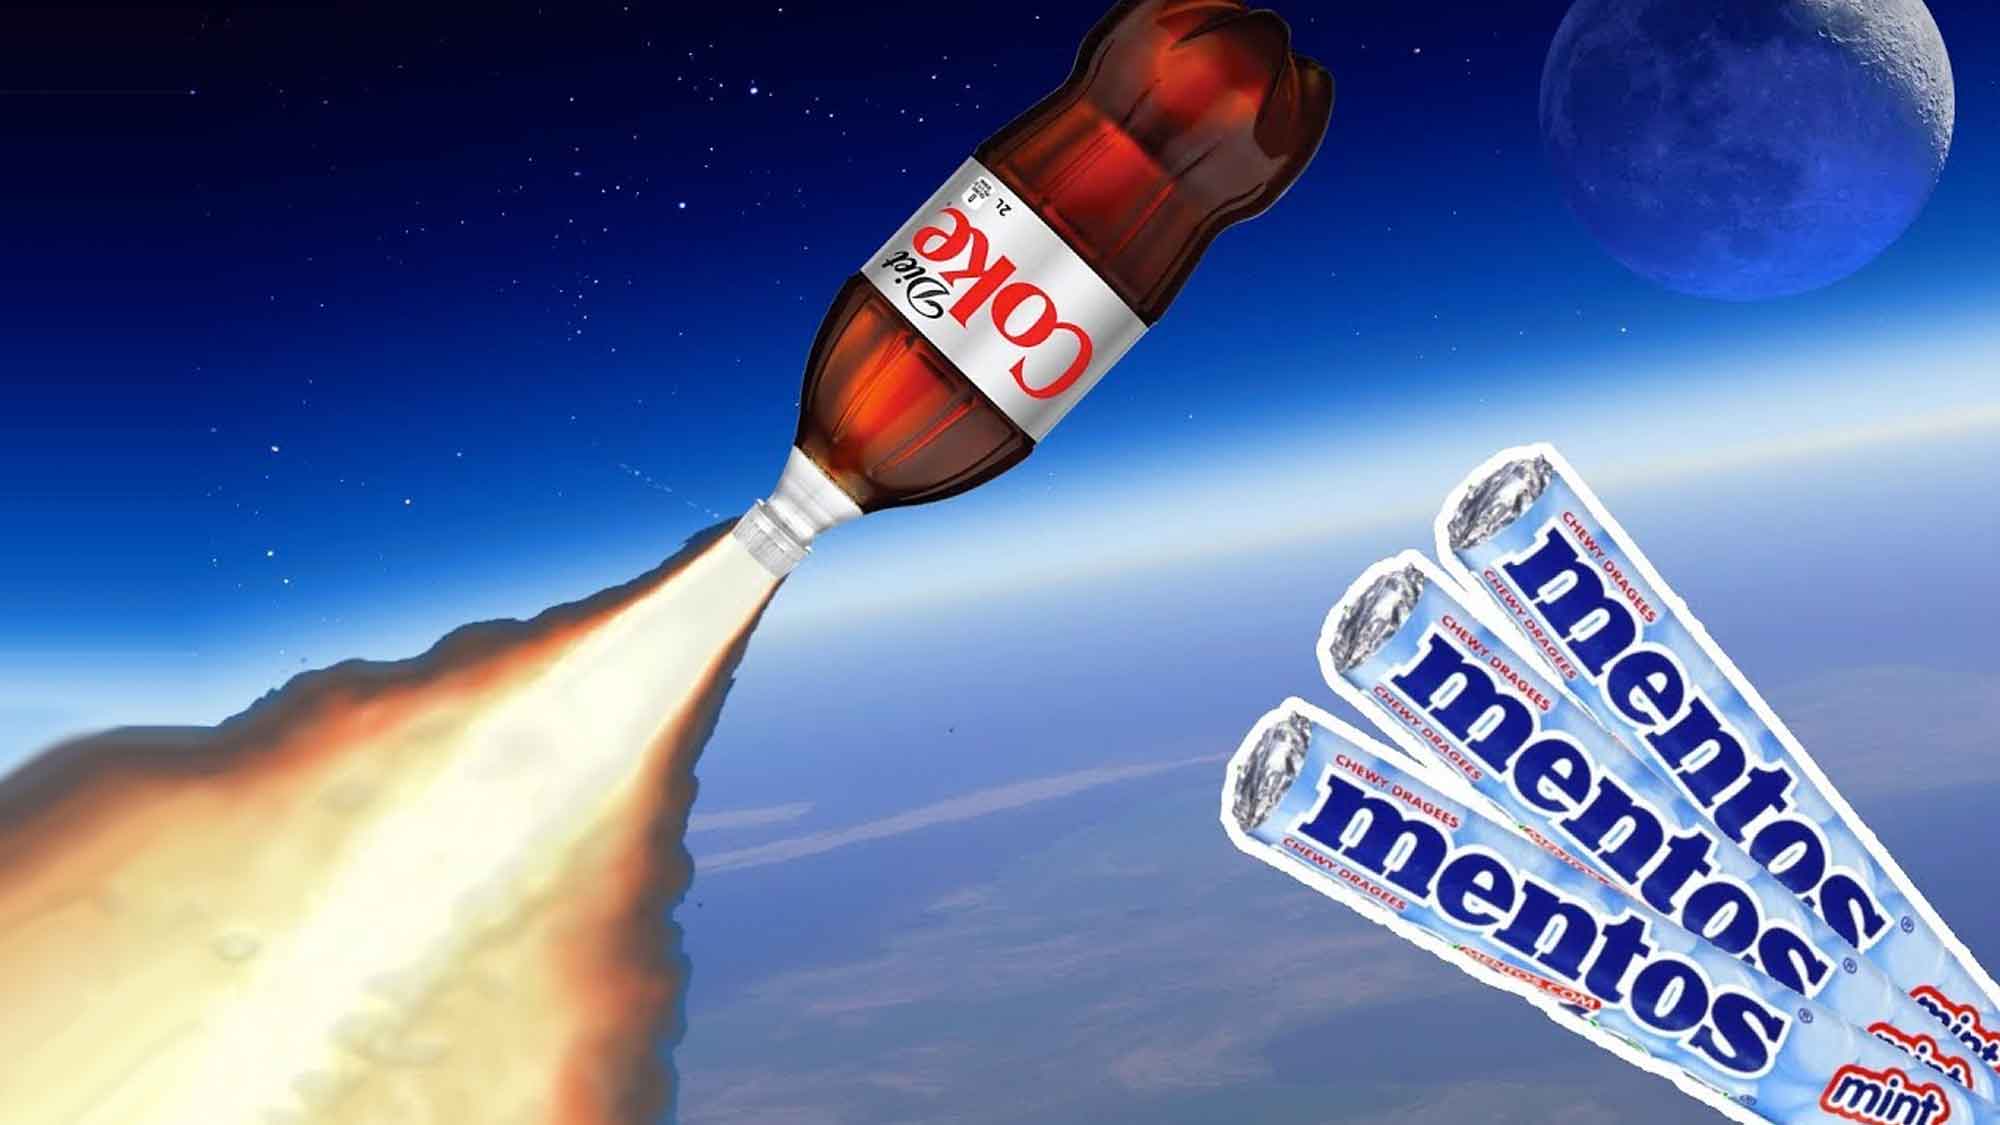 How To Make A Coke And Mentos Rocket That Goes 100-Feet In The Air